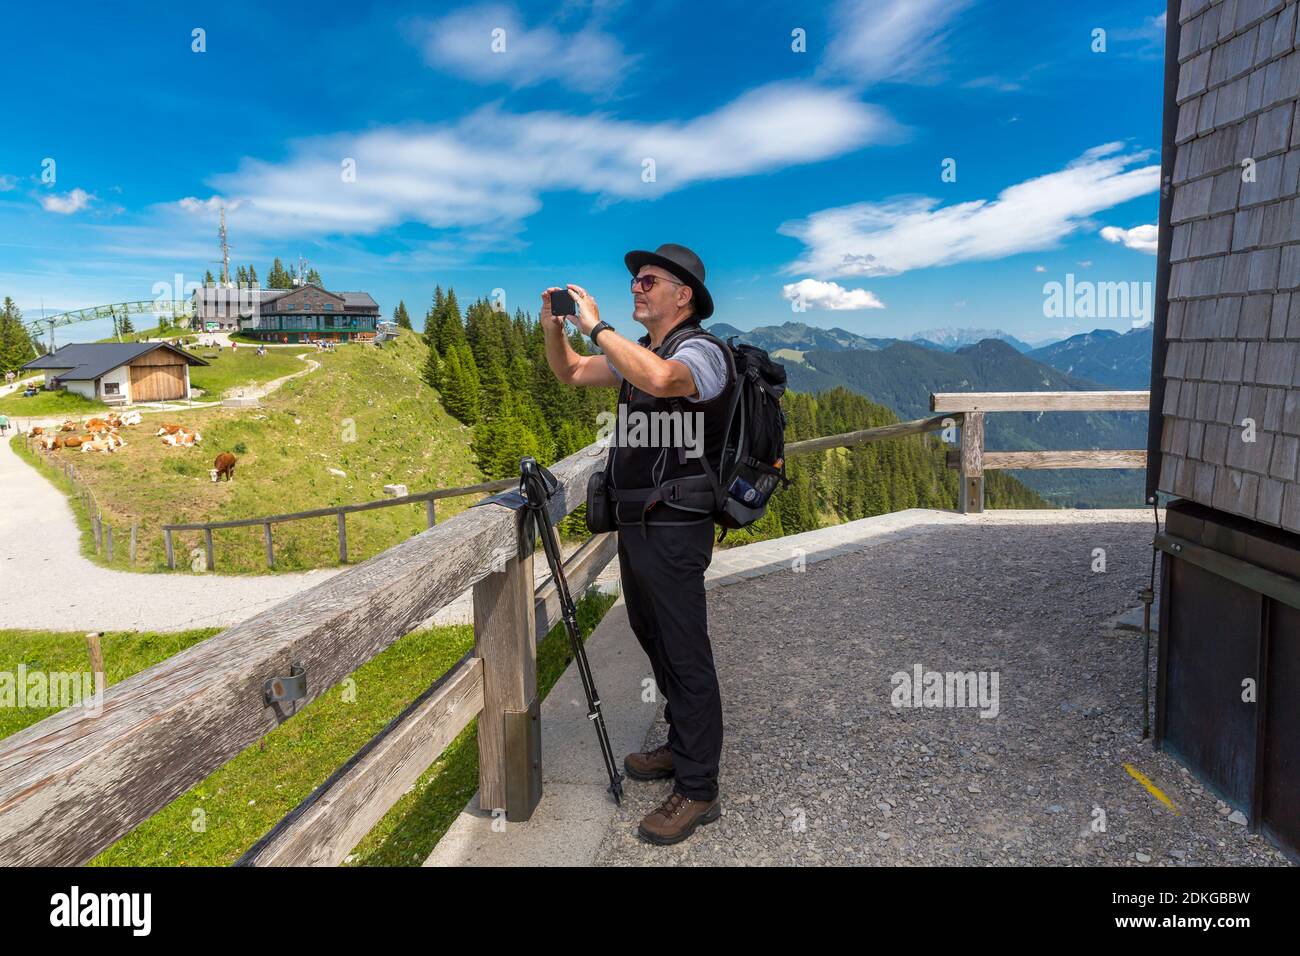 Man taking photos with the smartphone, Wallberg, Rottach-Egern, Tegernsee, Bavarian Alps, Bavaria, Germany, Europe Stock Photo